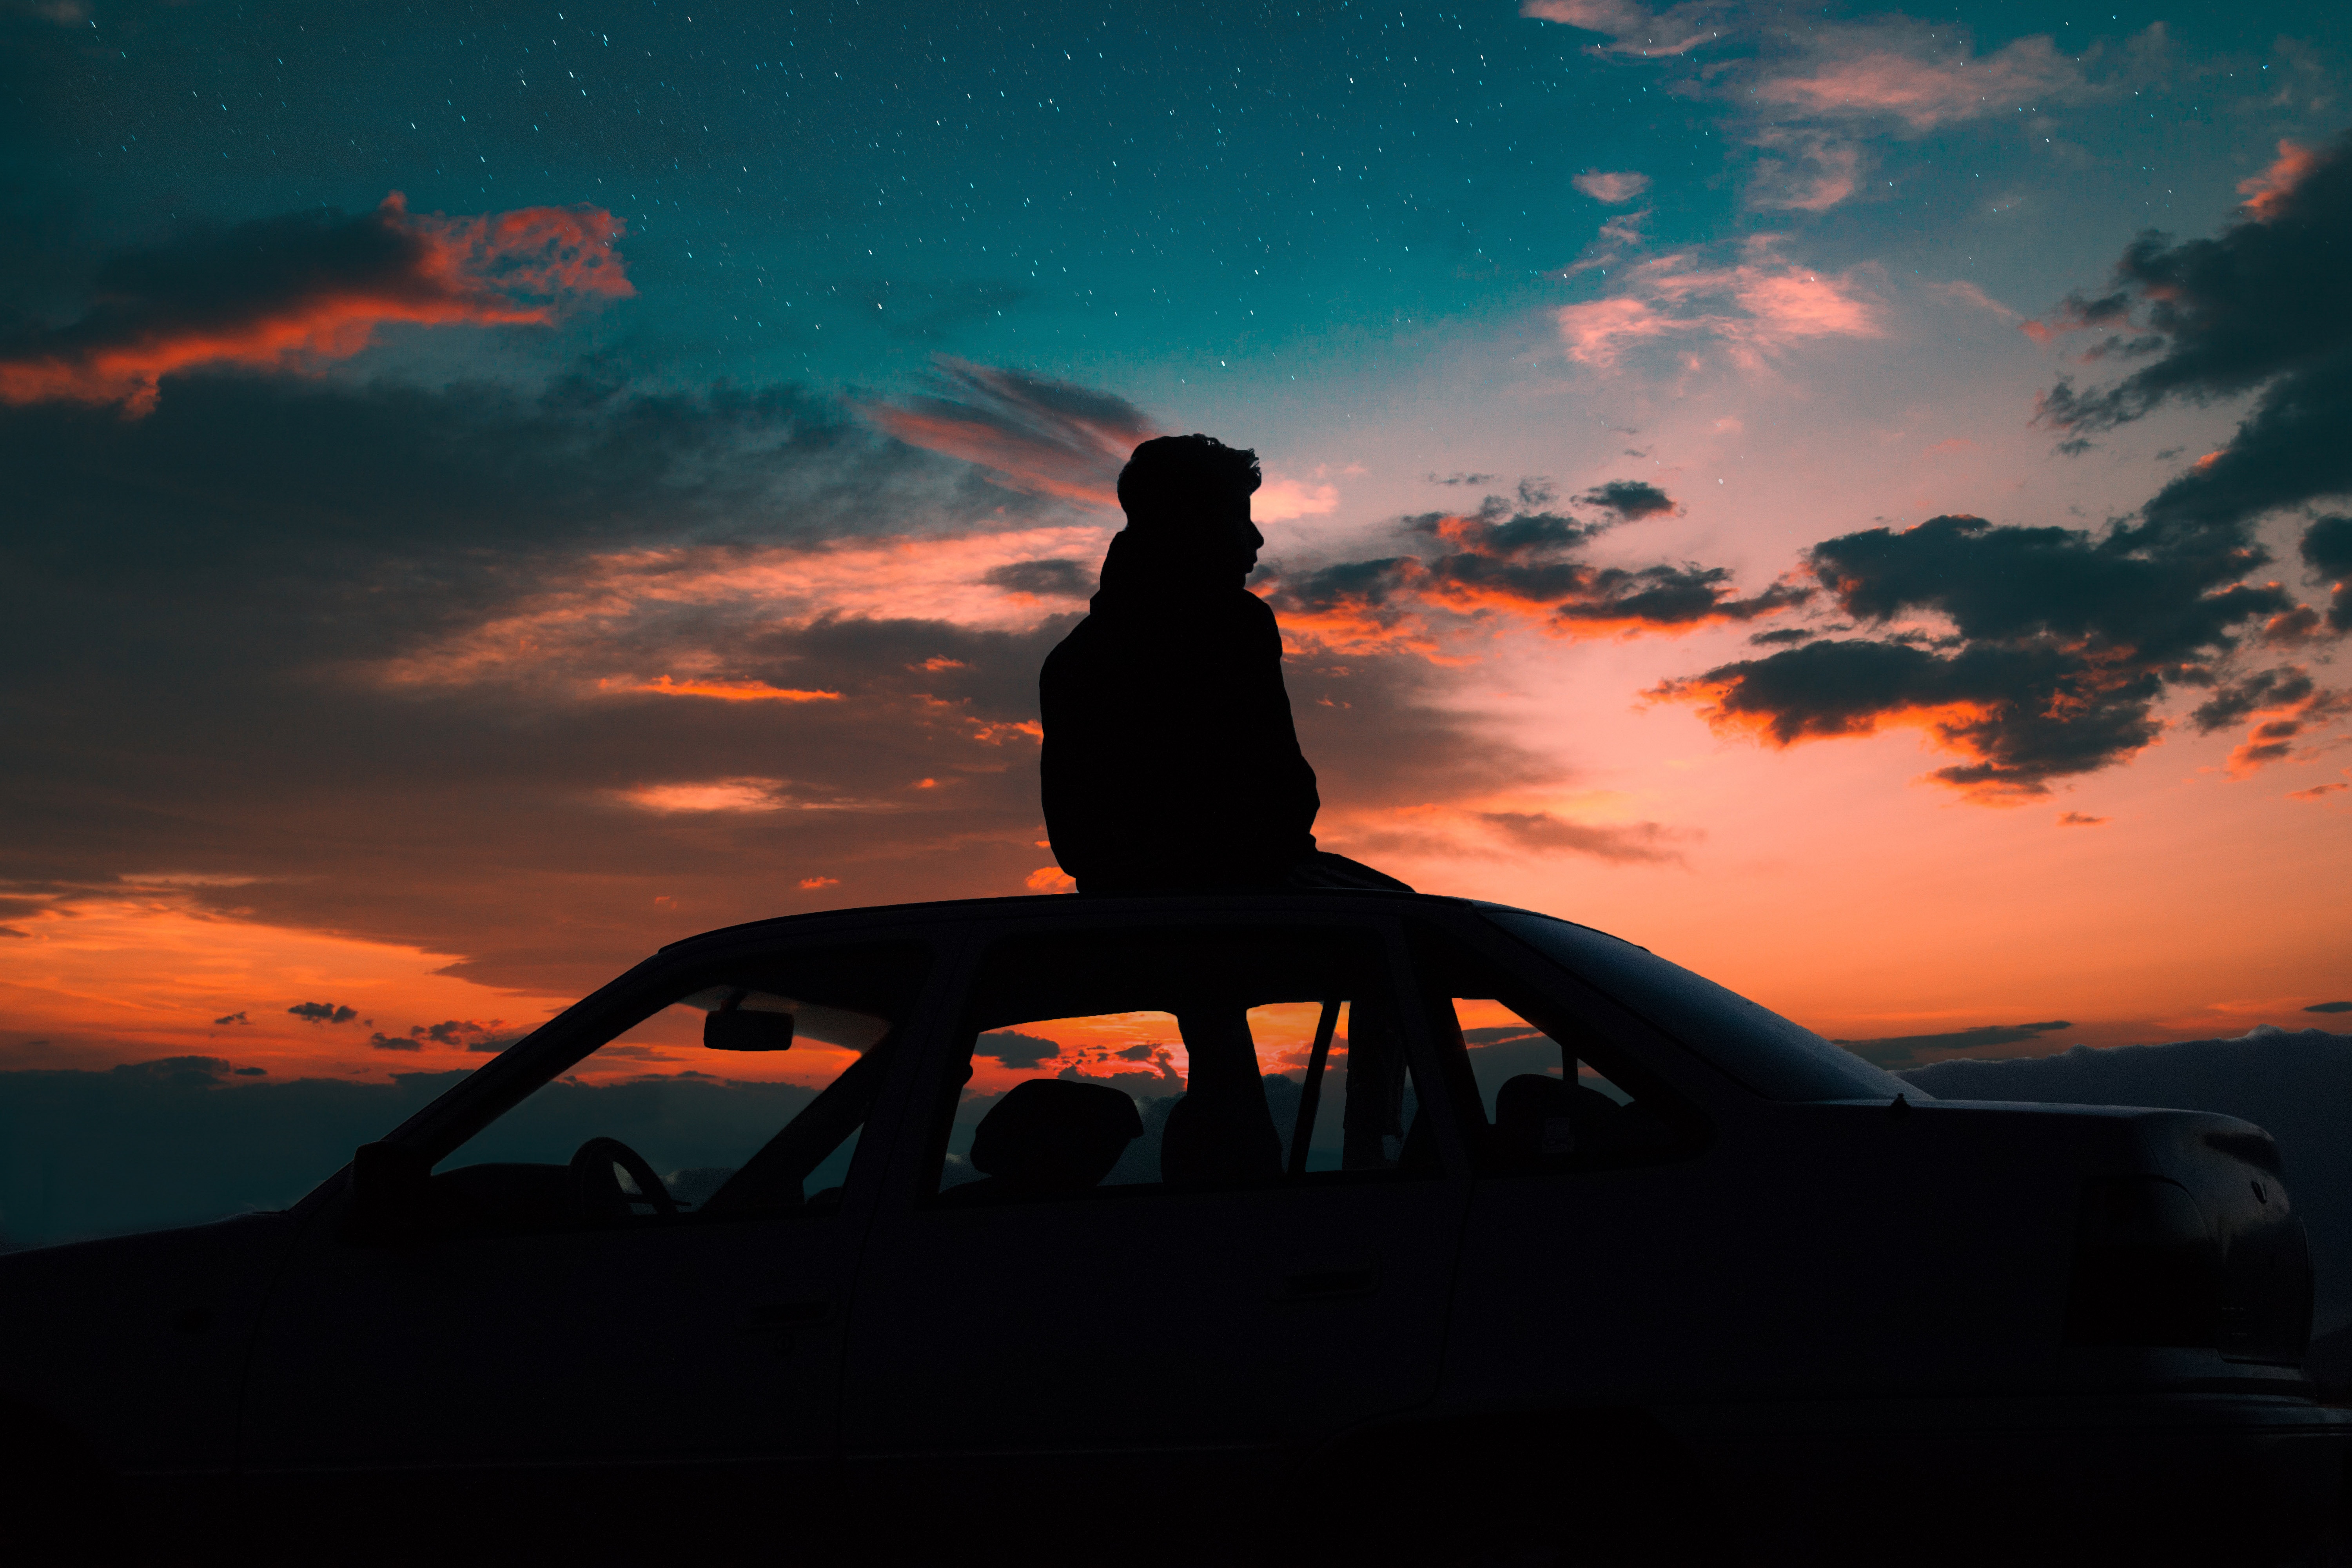 car, loneliness, dark, privacy, seclusion, starry sky, human, person